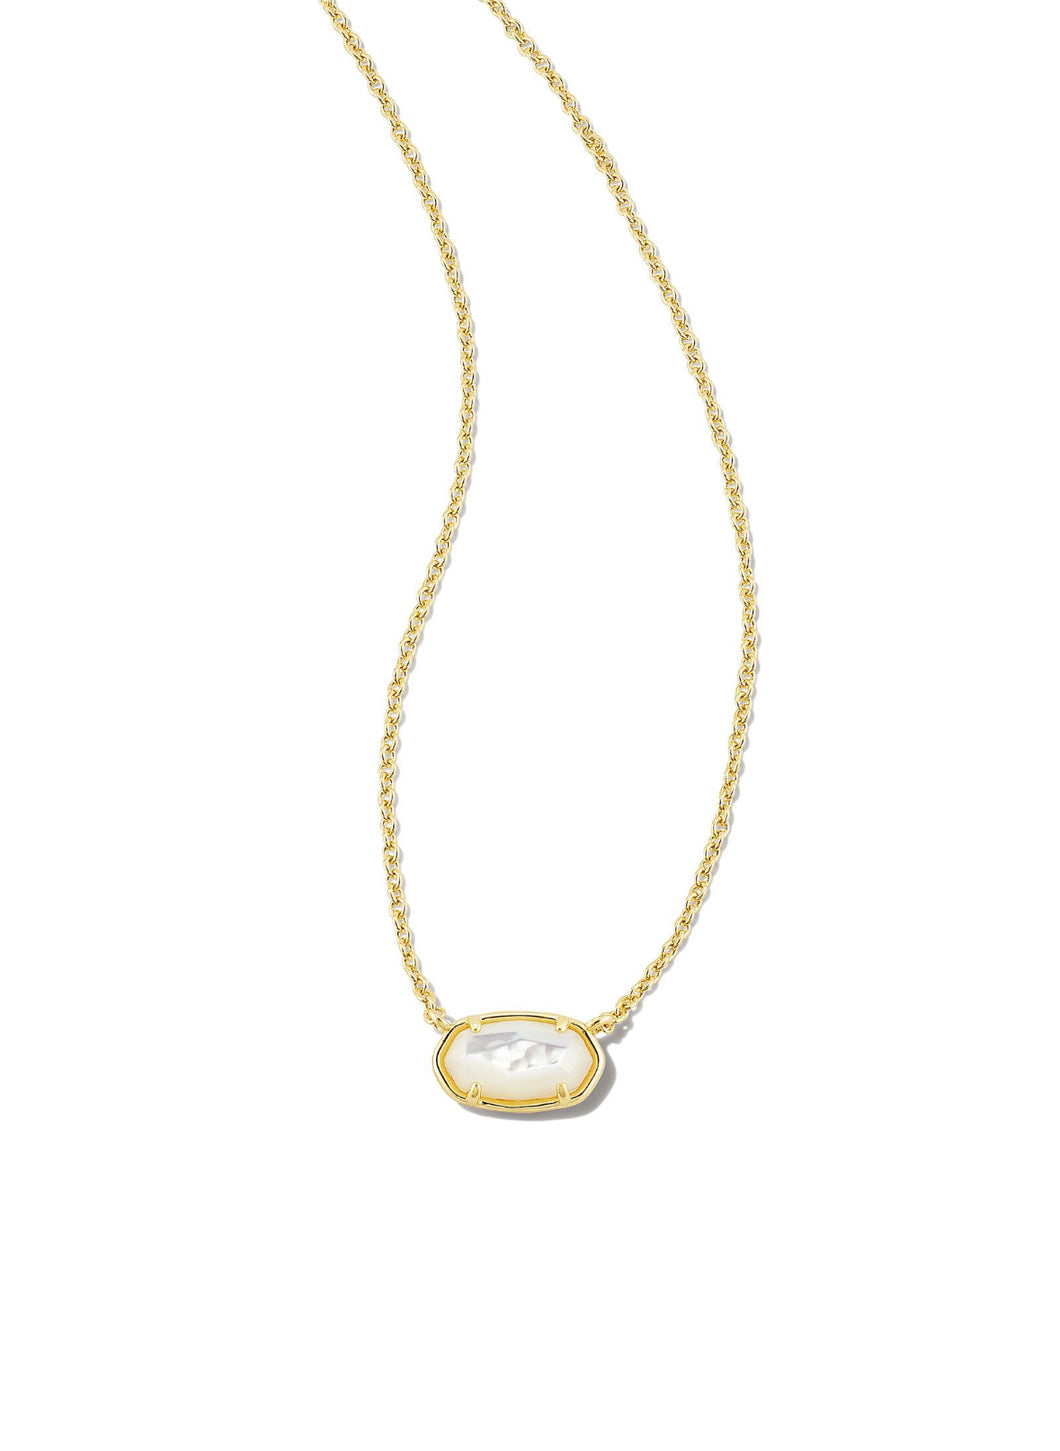 Kendra Scott: Grayson Necklace in Gold Ivory MOP